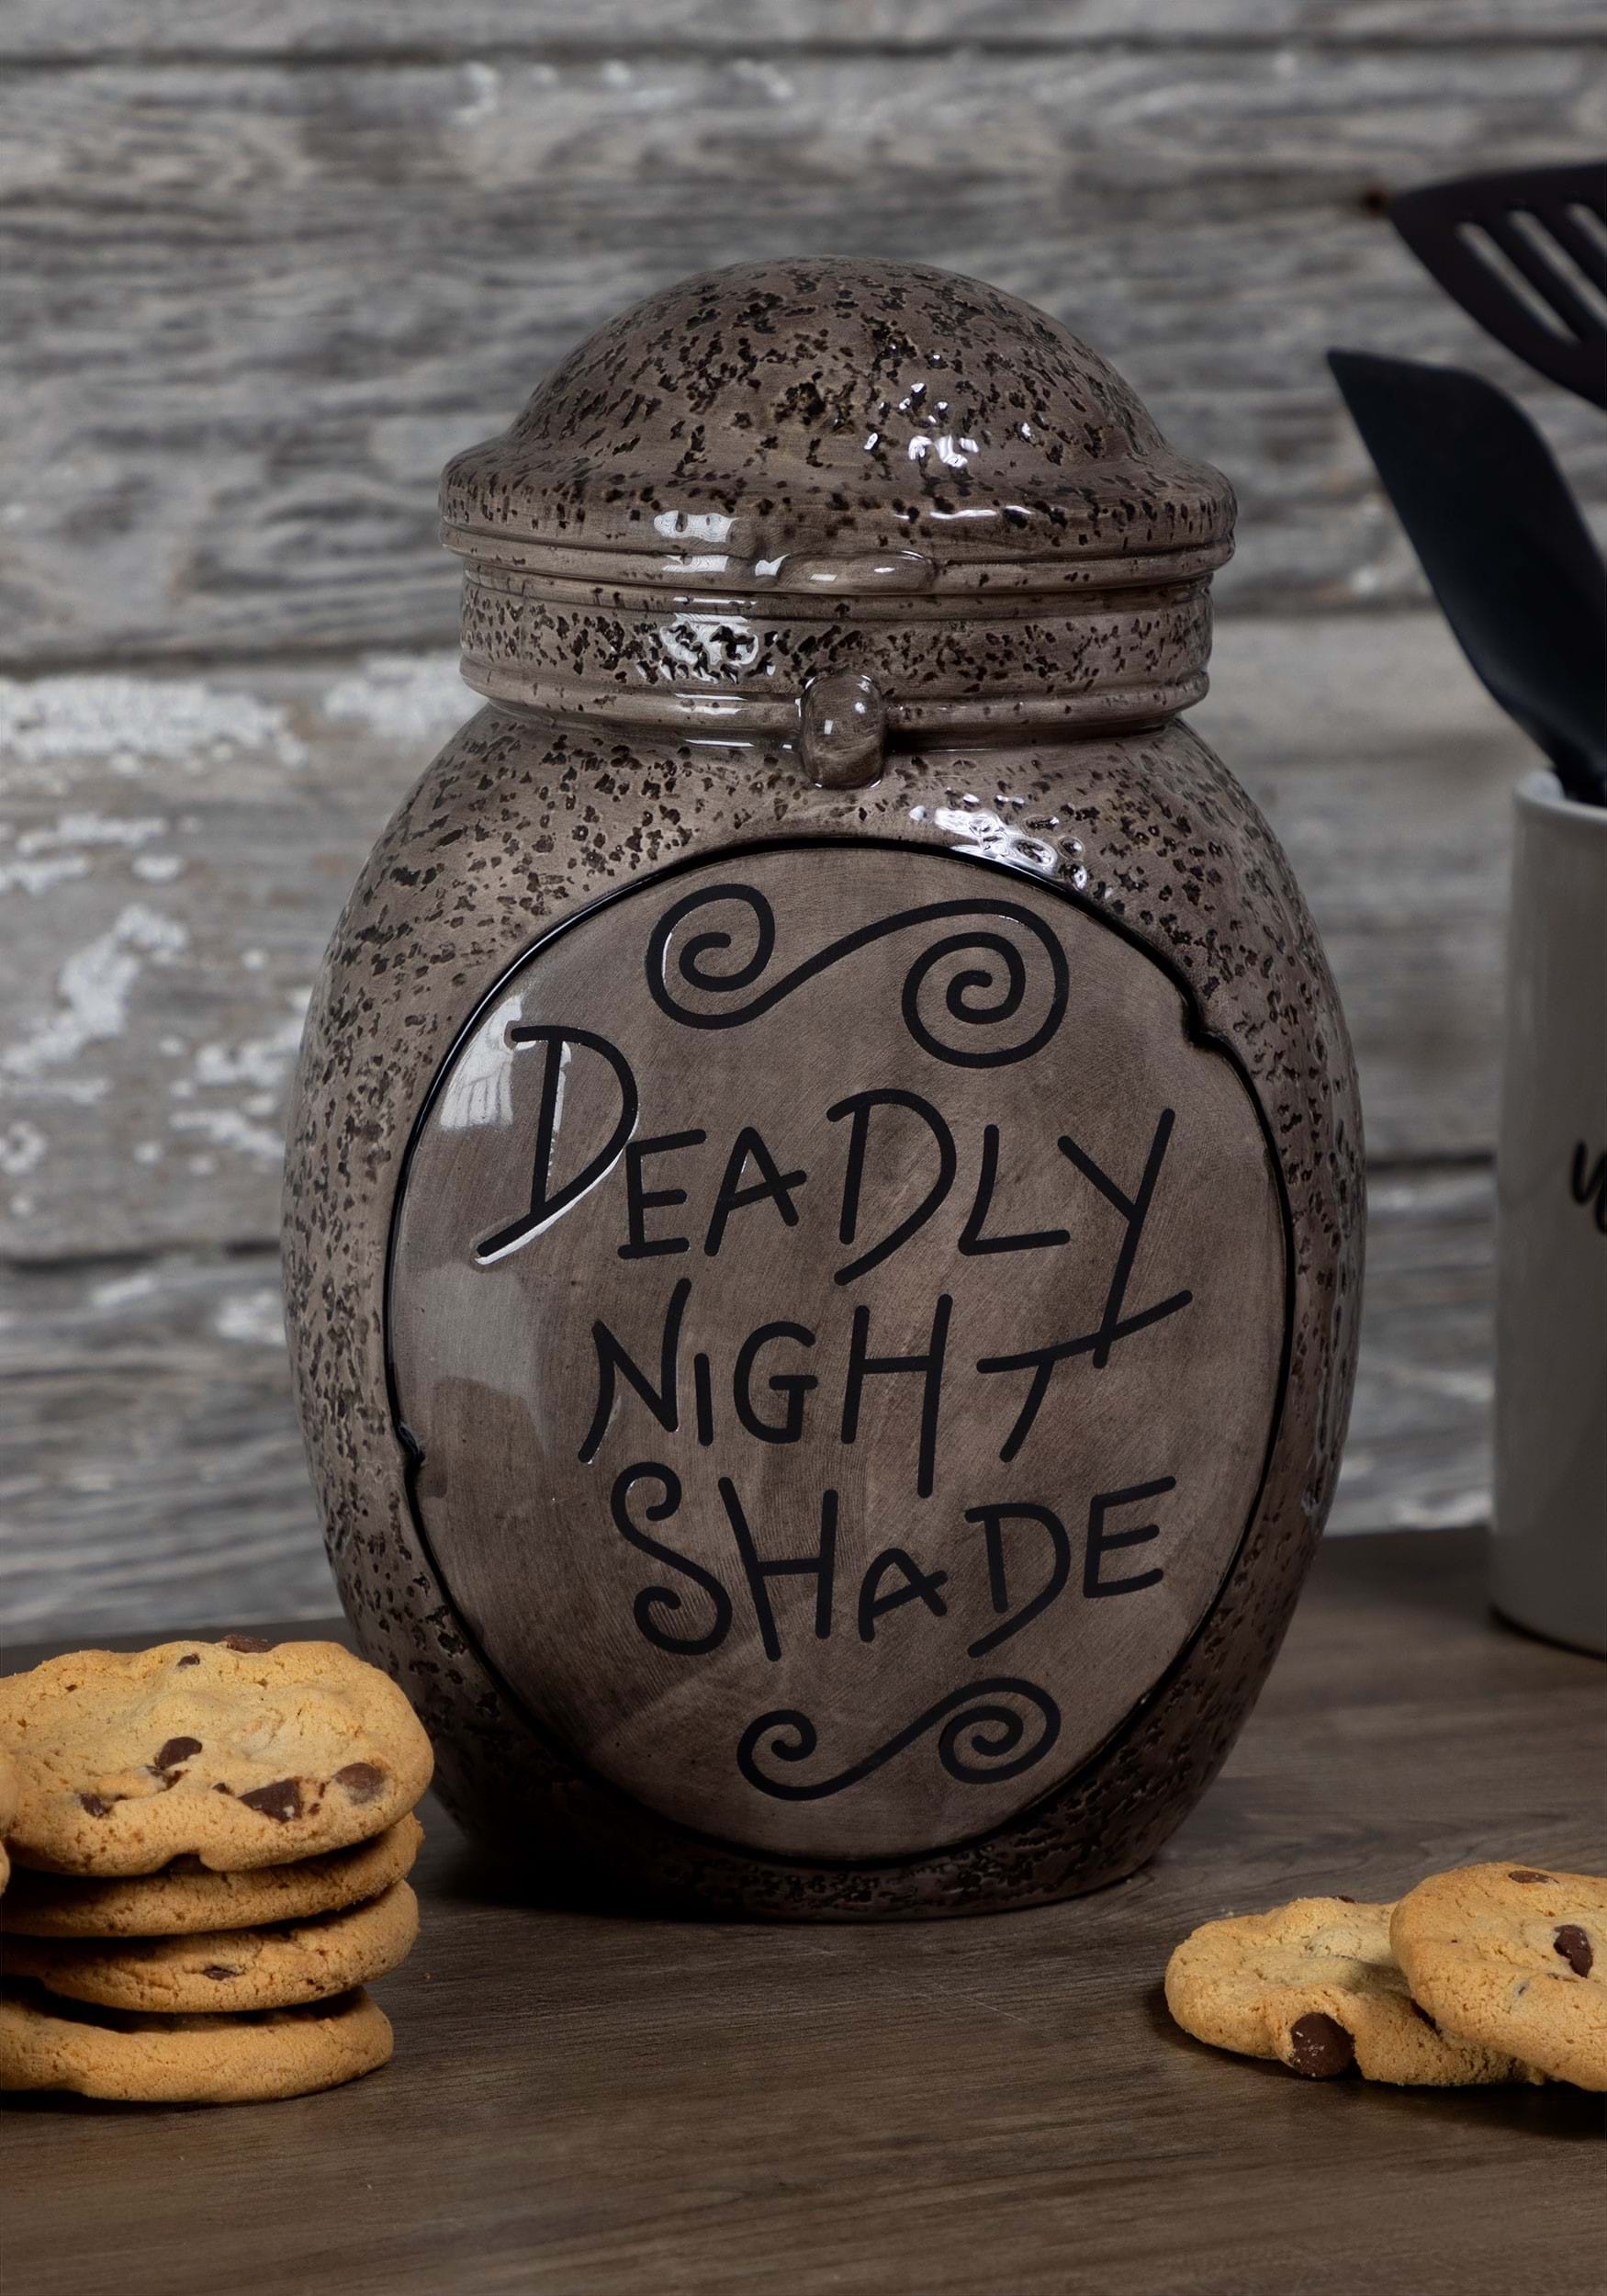 https://images.halloween.com/products/86713/1-1/ceramic-deadly-night-shade-cookie-jar.jpg